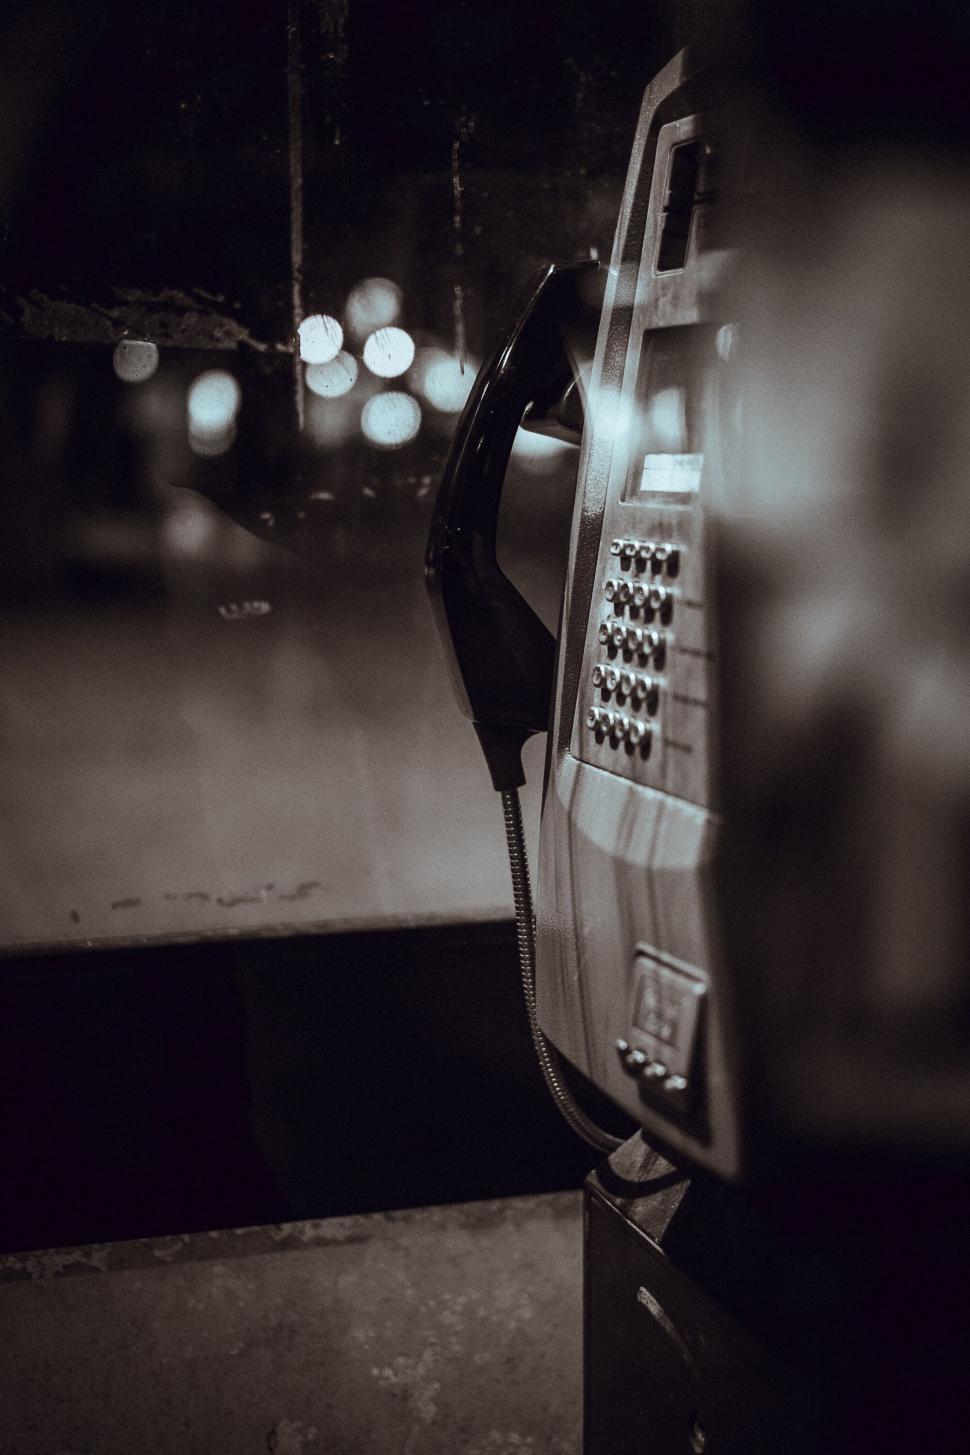 Free Image of Vintage payphone in a dark surrounding 